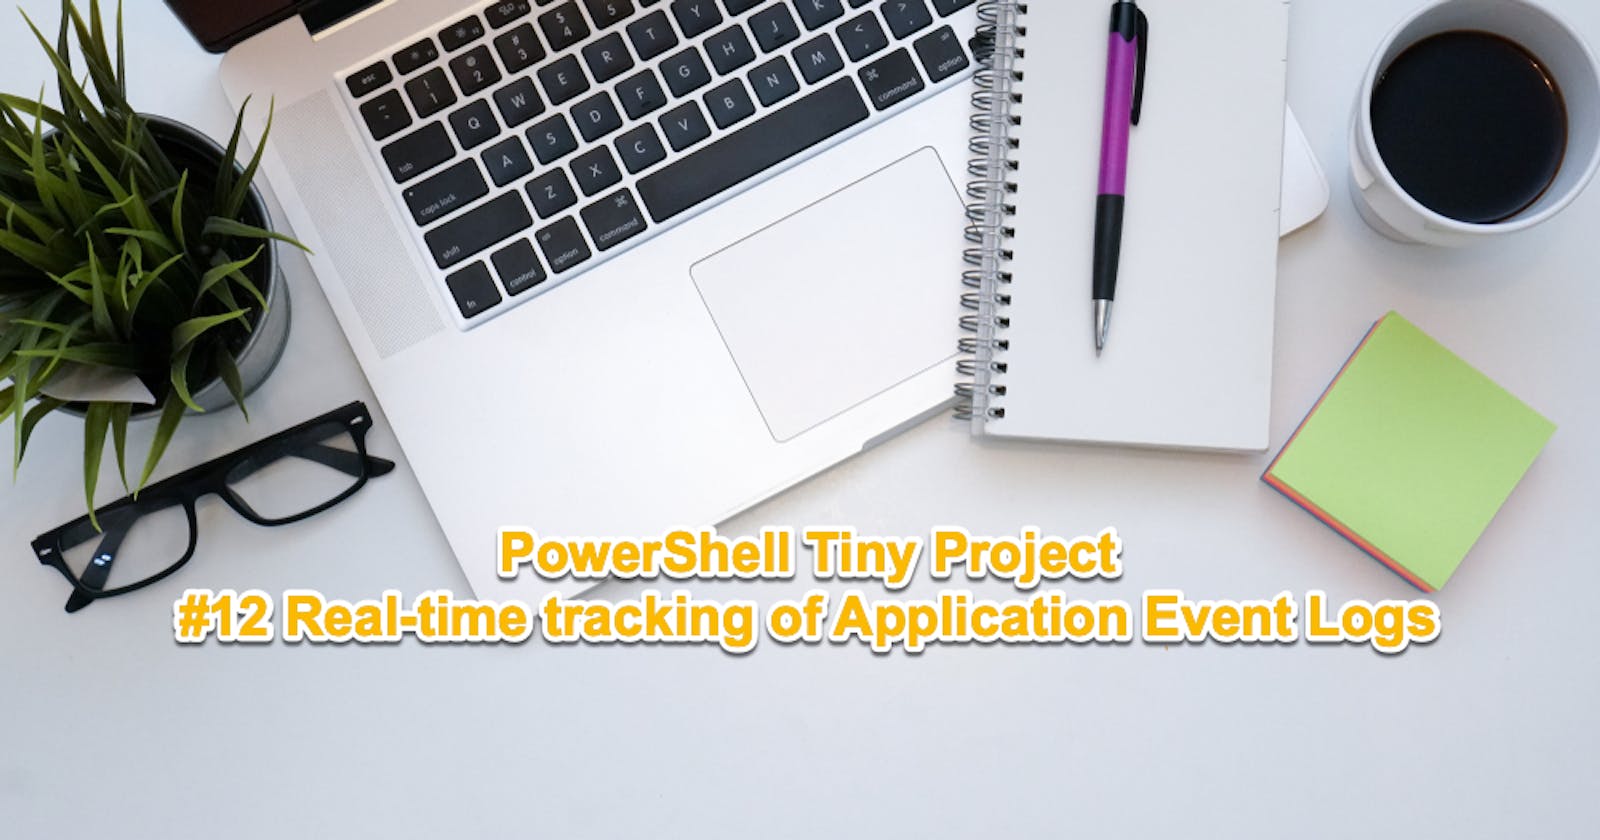 PowerShell Tiny Project #12 - Real-time Tracking of Application Event Logs